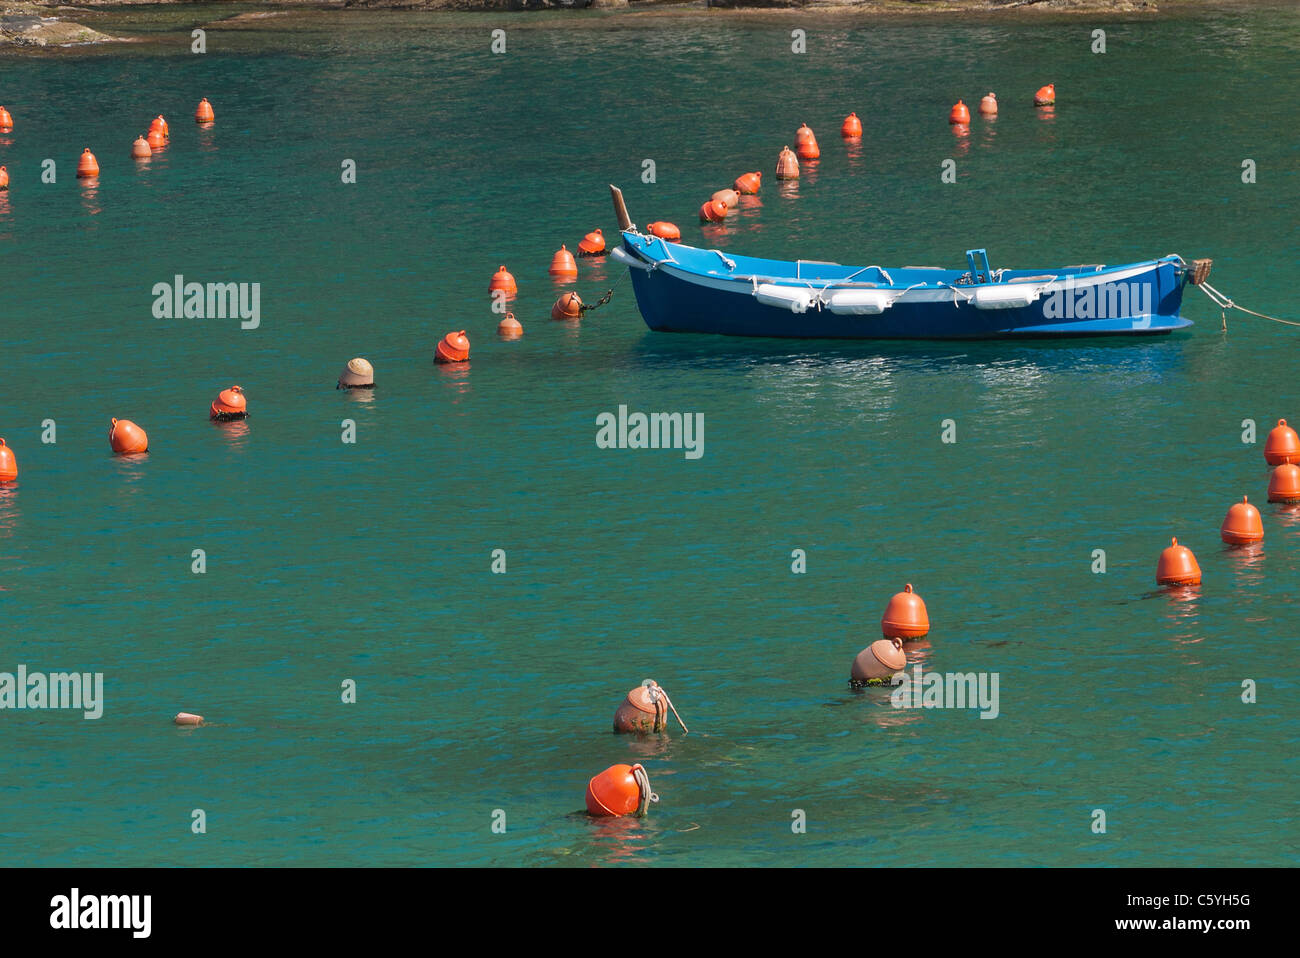 Row boat moored in harbor surrounded by small orange markers (buoys or bumpers), Vernazza, Cinque Terre, Italy. Stock Photo